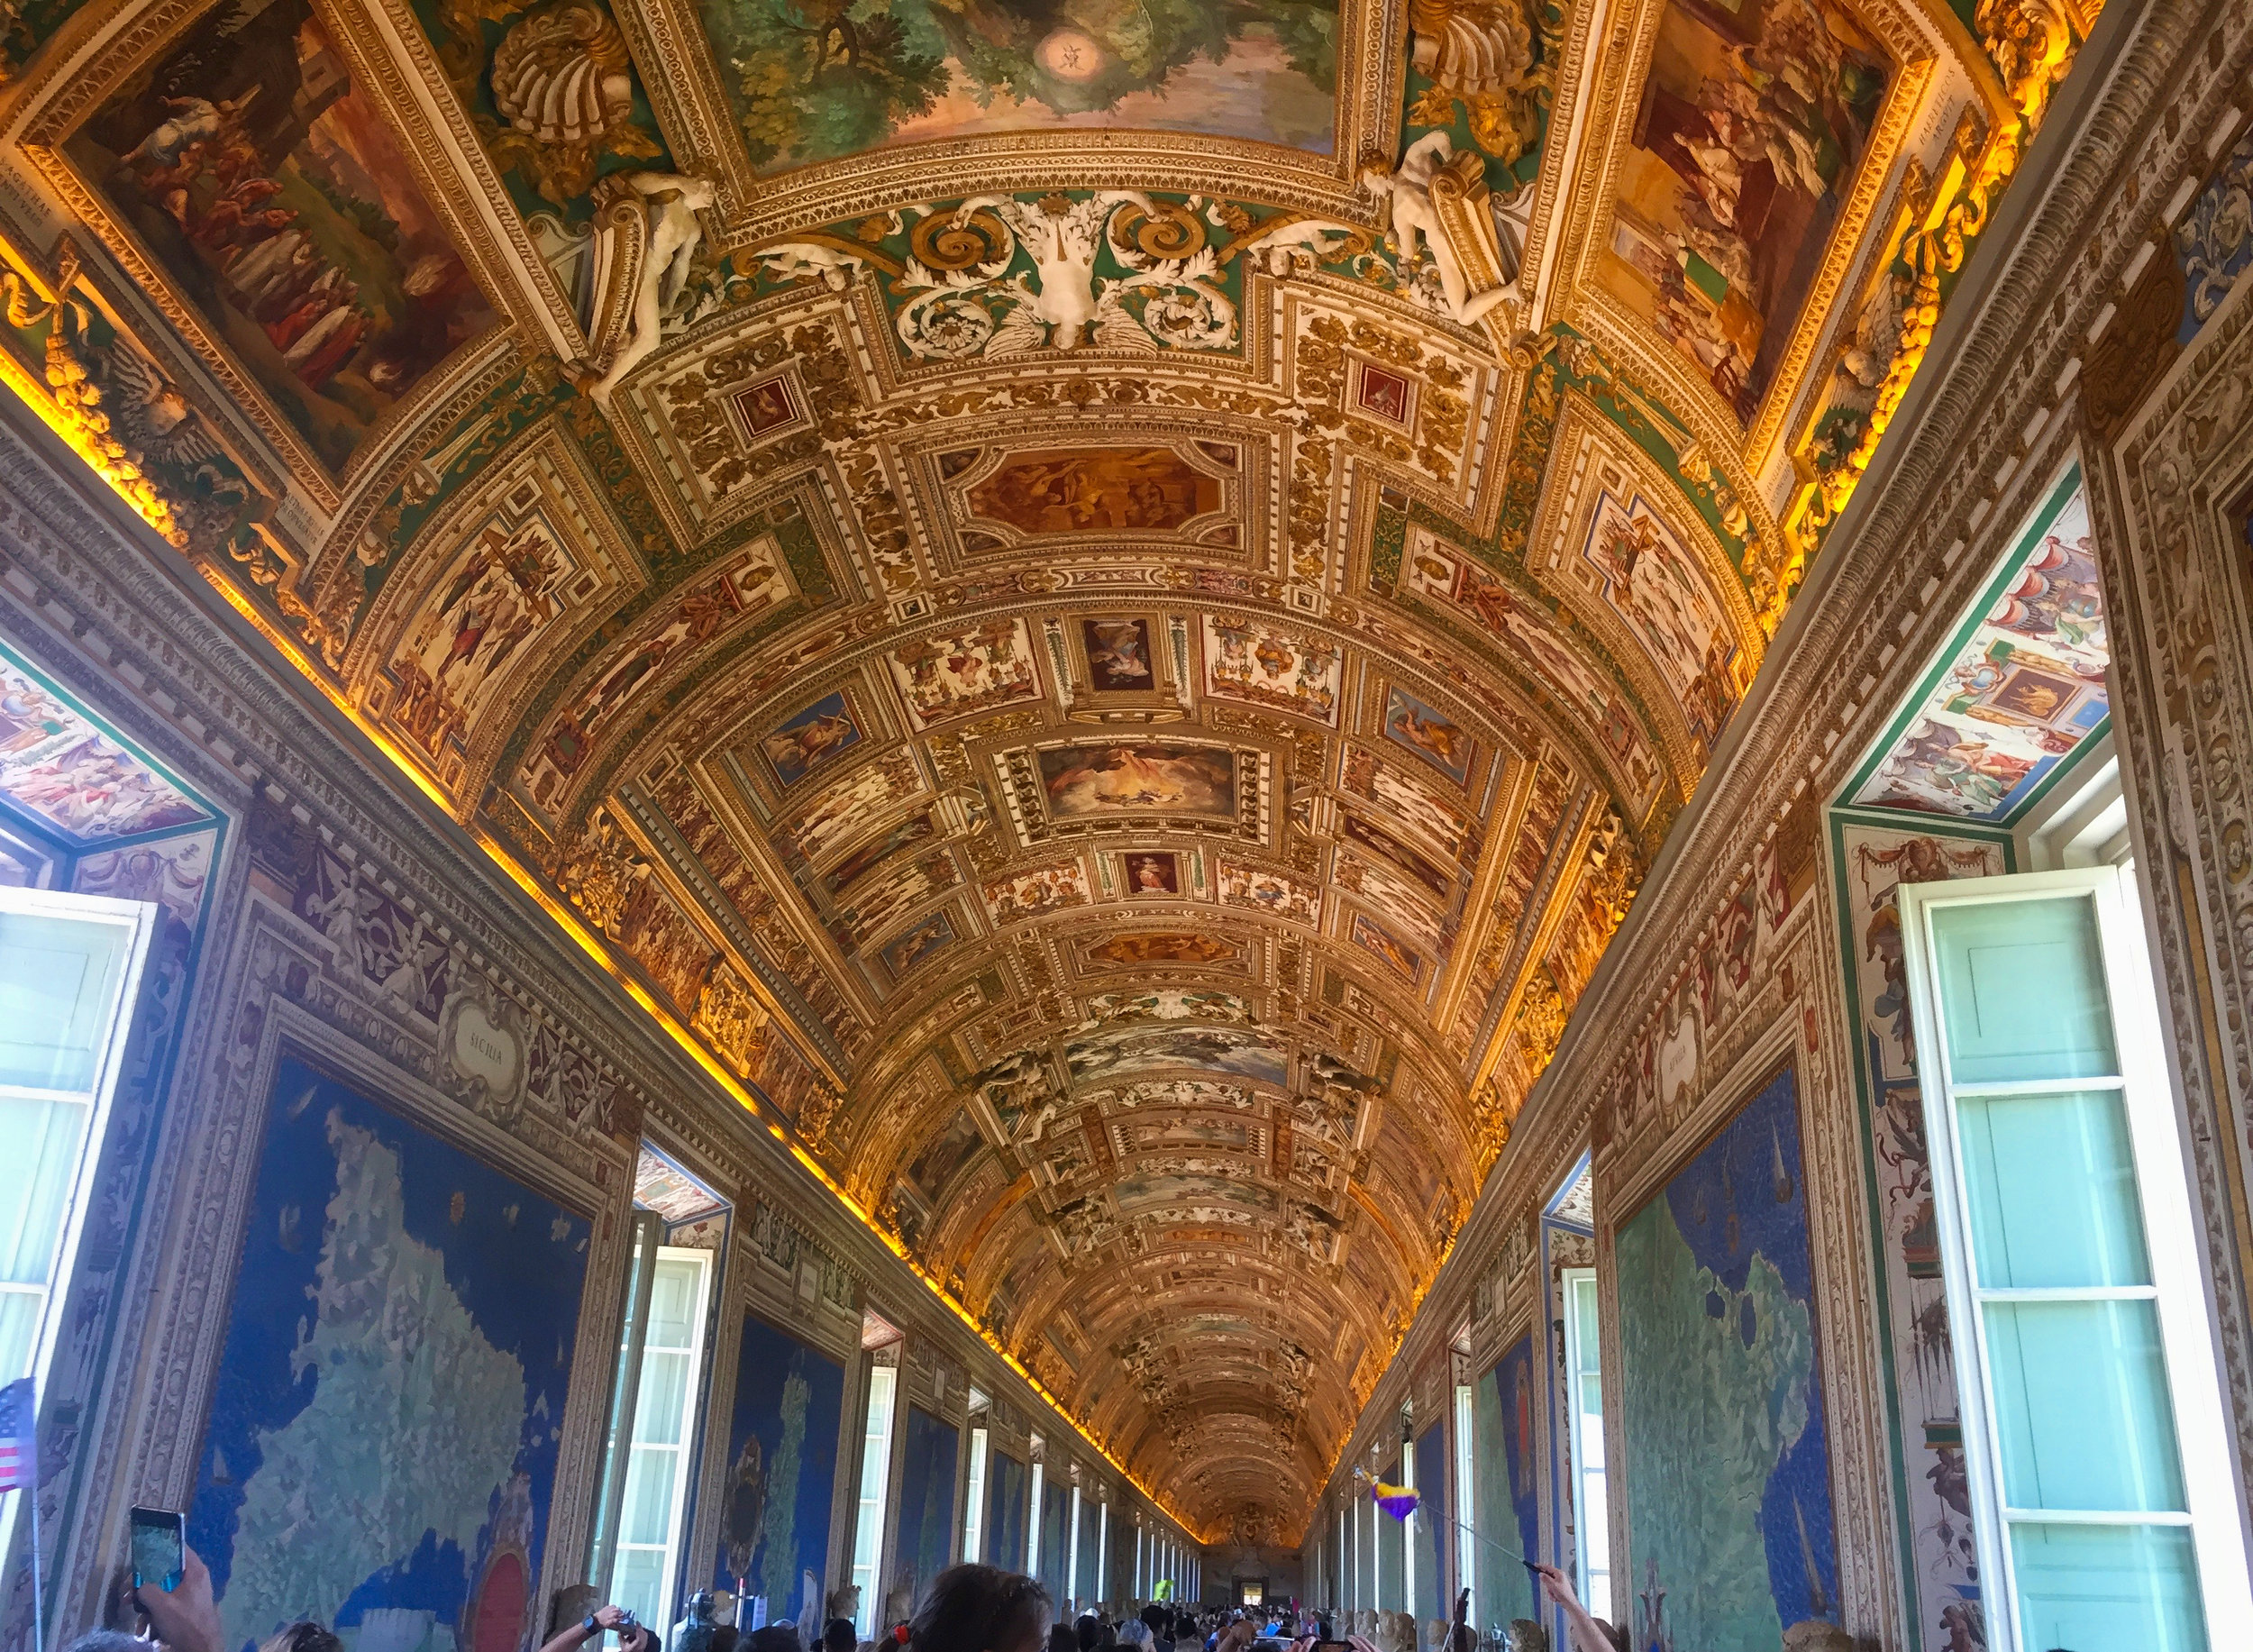  The gallery of Maps of Italy. Just wall to wall people. The flags are so you know where you tour guide is. 